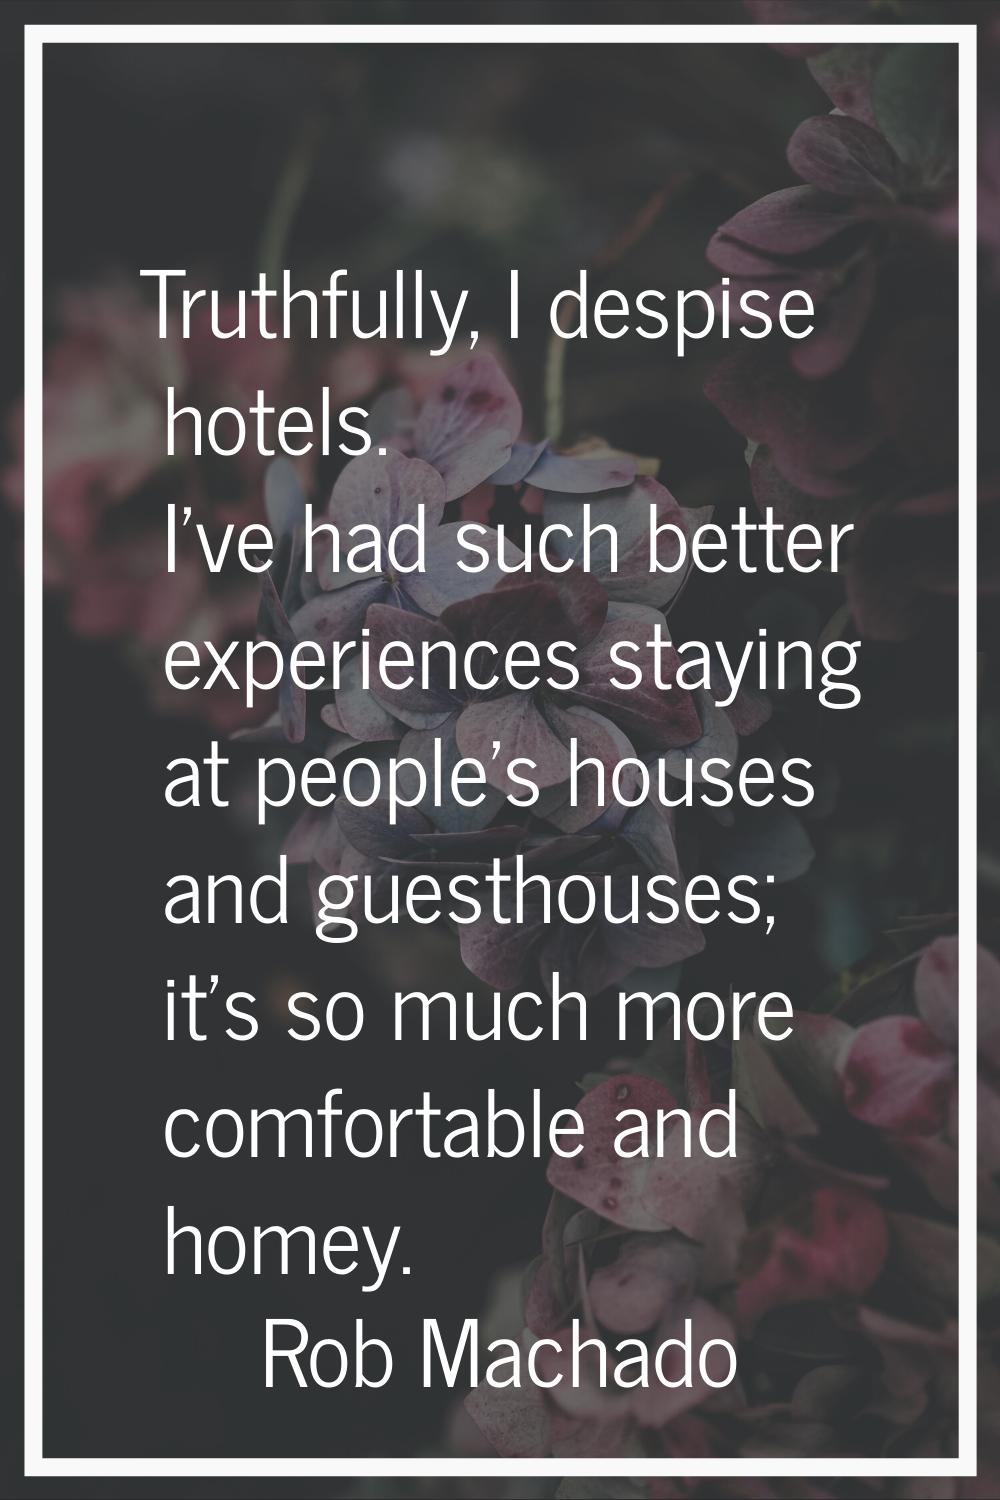 Truthfully, I despise hotels. I've had such better experiences staying at people's houses and guest